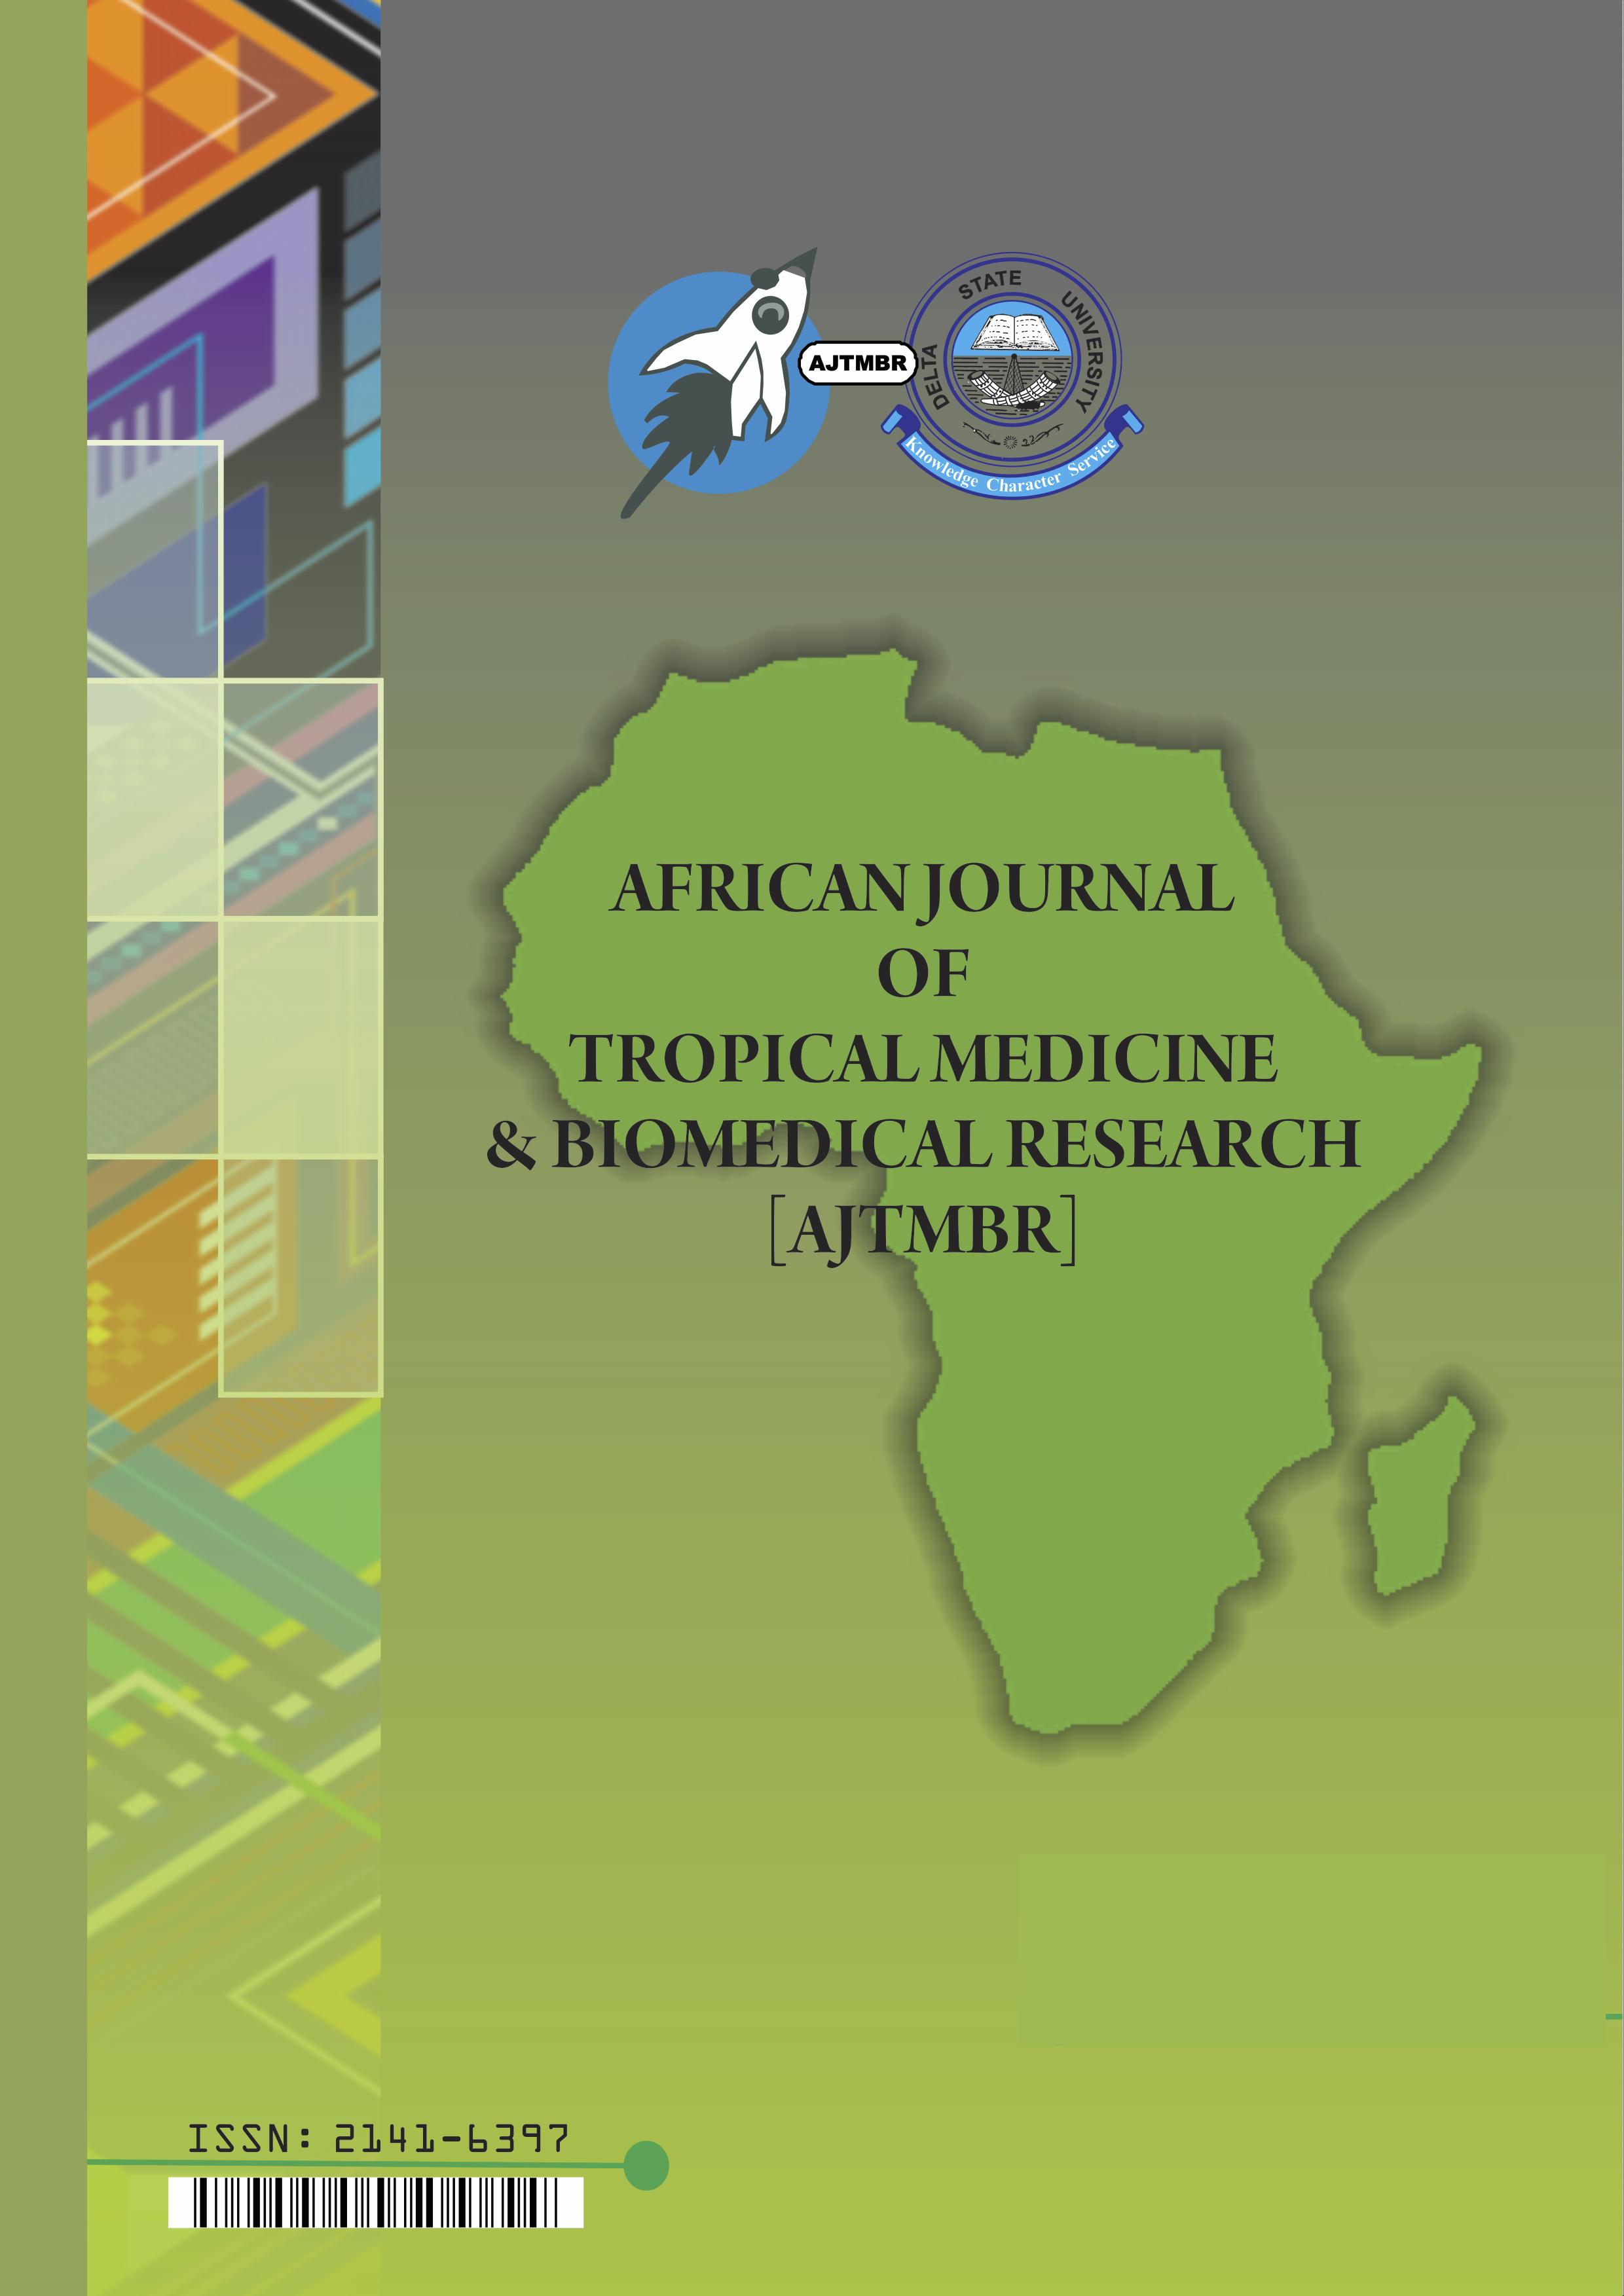 					View Vol. 3 No. 1: African Journal of Tropical Medicine and Biomedical Research; March 2015
				